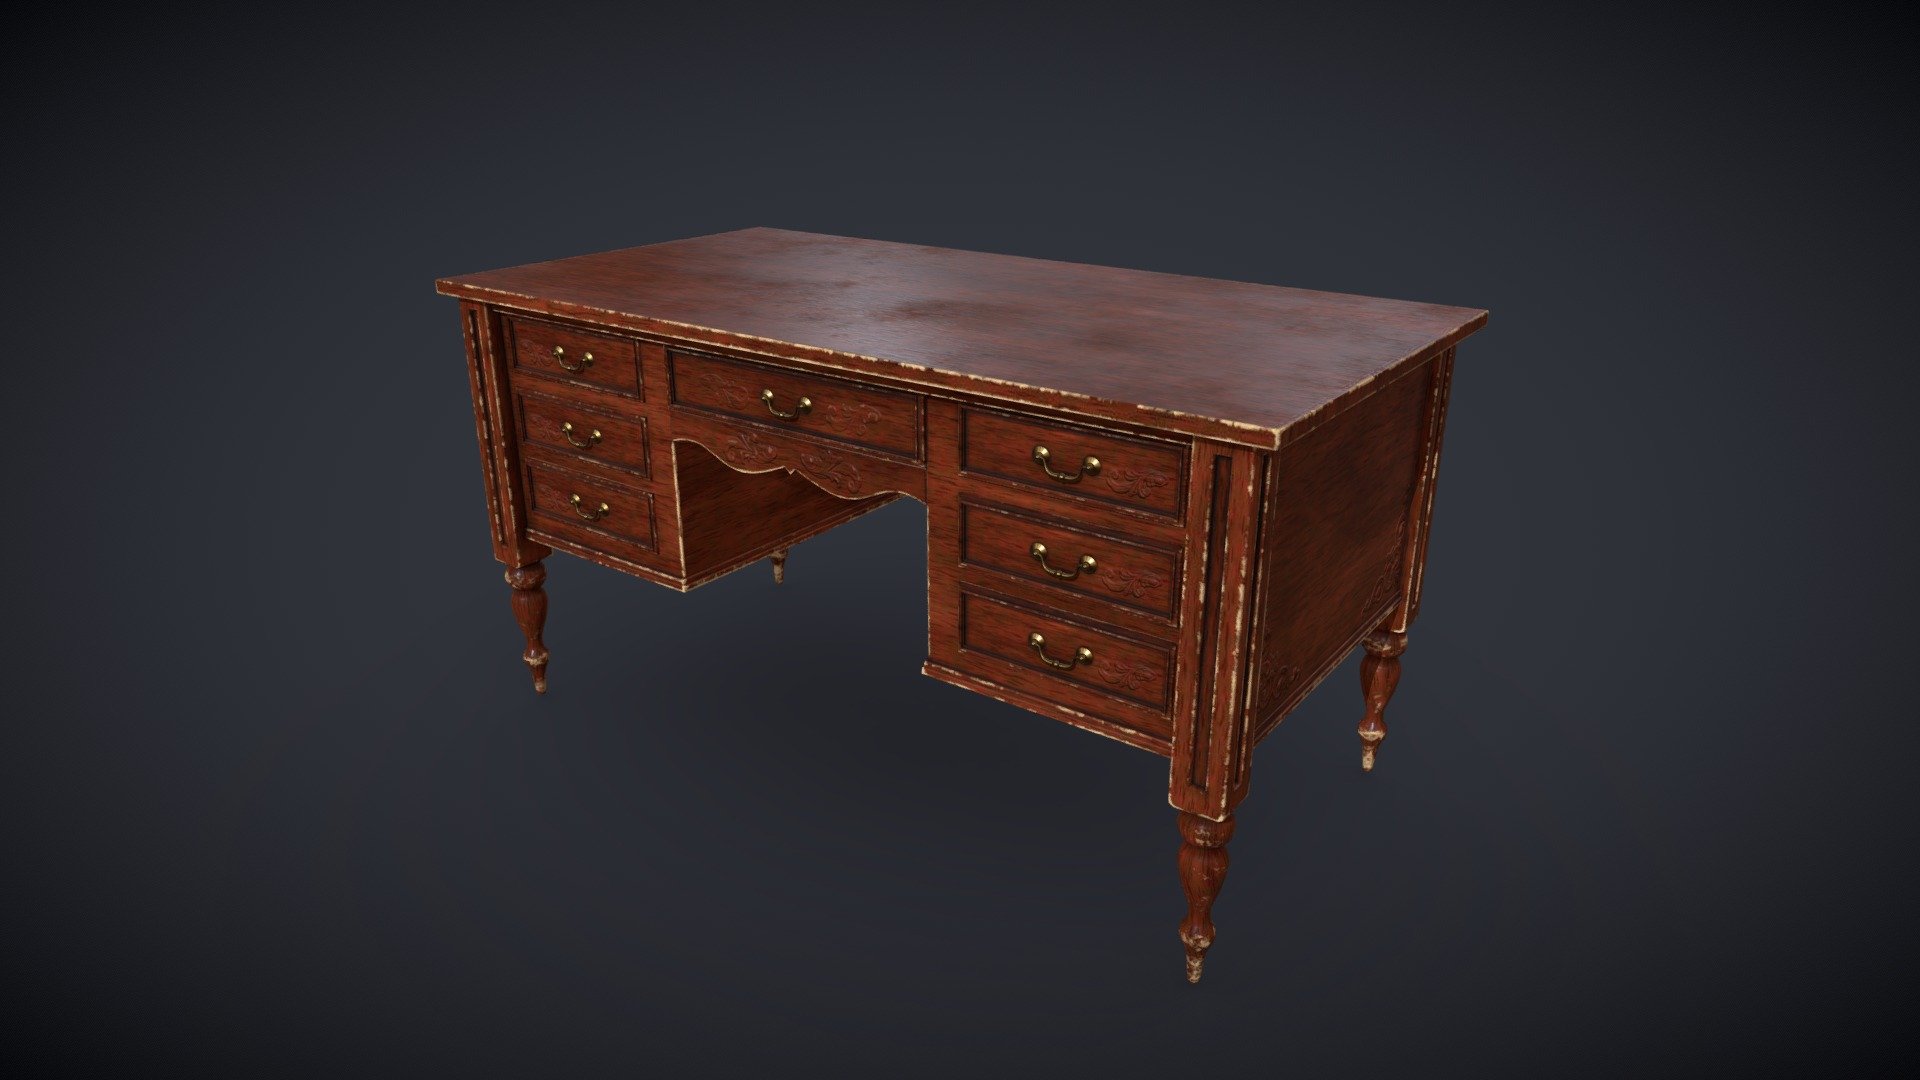 Old Desk with movable Drawers

Base Color
Normal
and packed MRAO Maps included
optimized for realtime - Beautiful Vintage Desk - Buy Royalty Free 3D model by Ray (@rayro) 3d model